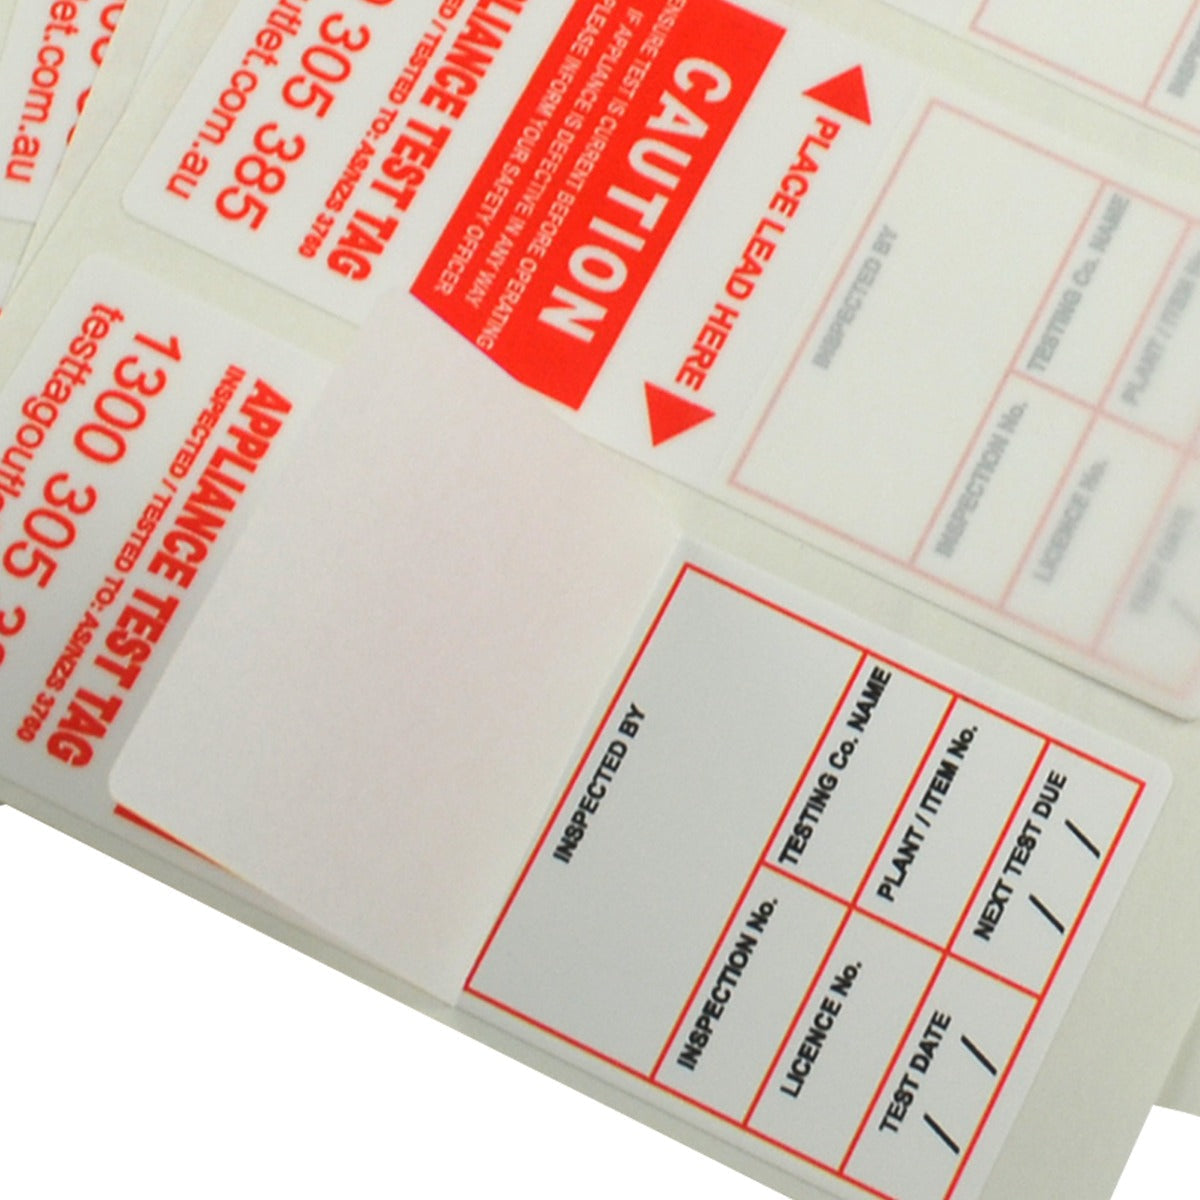 Waterproof, Weather Resistant Red Heavy Duty Test Tags that complies with AS/NZS 3760 standards